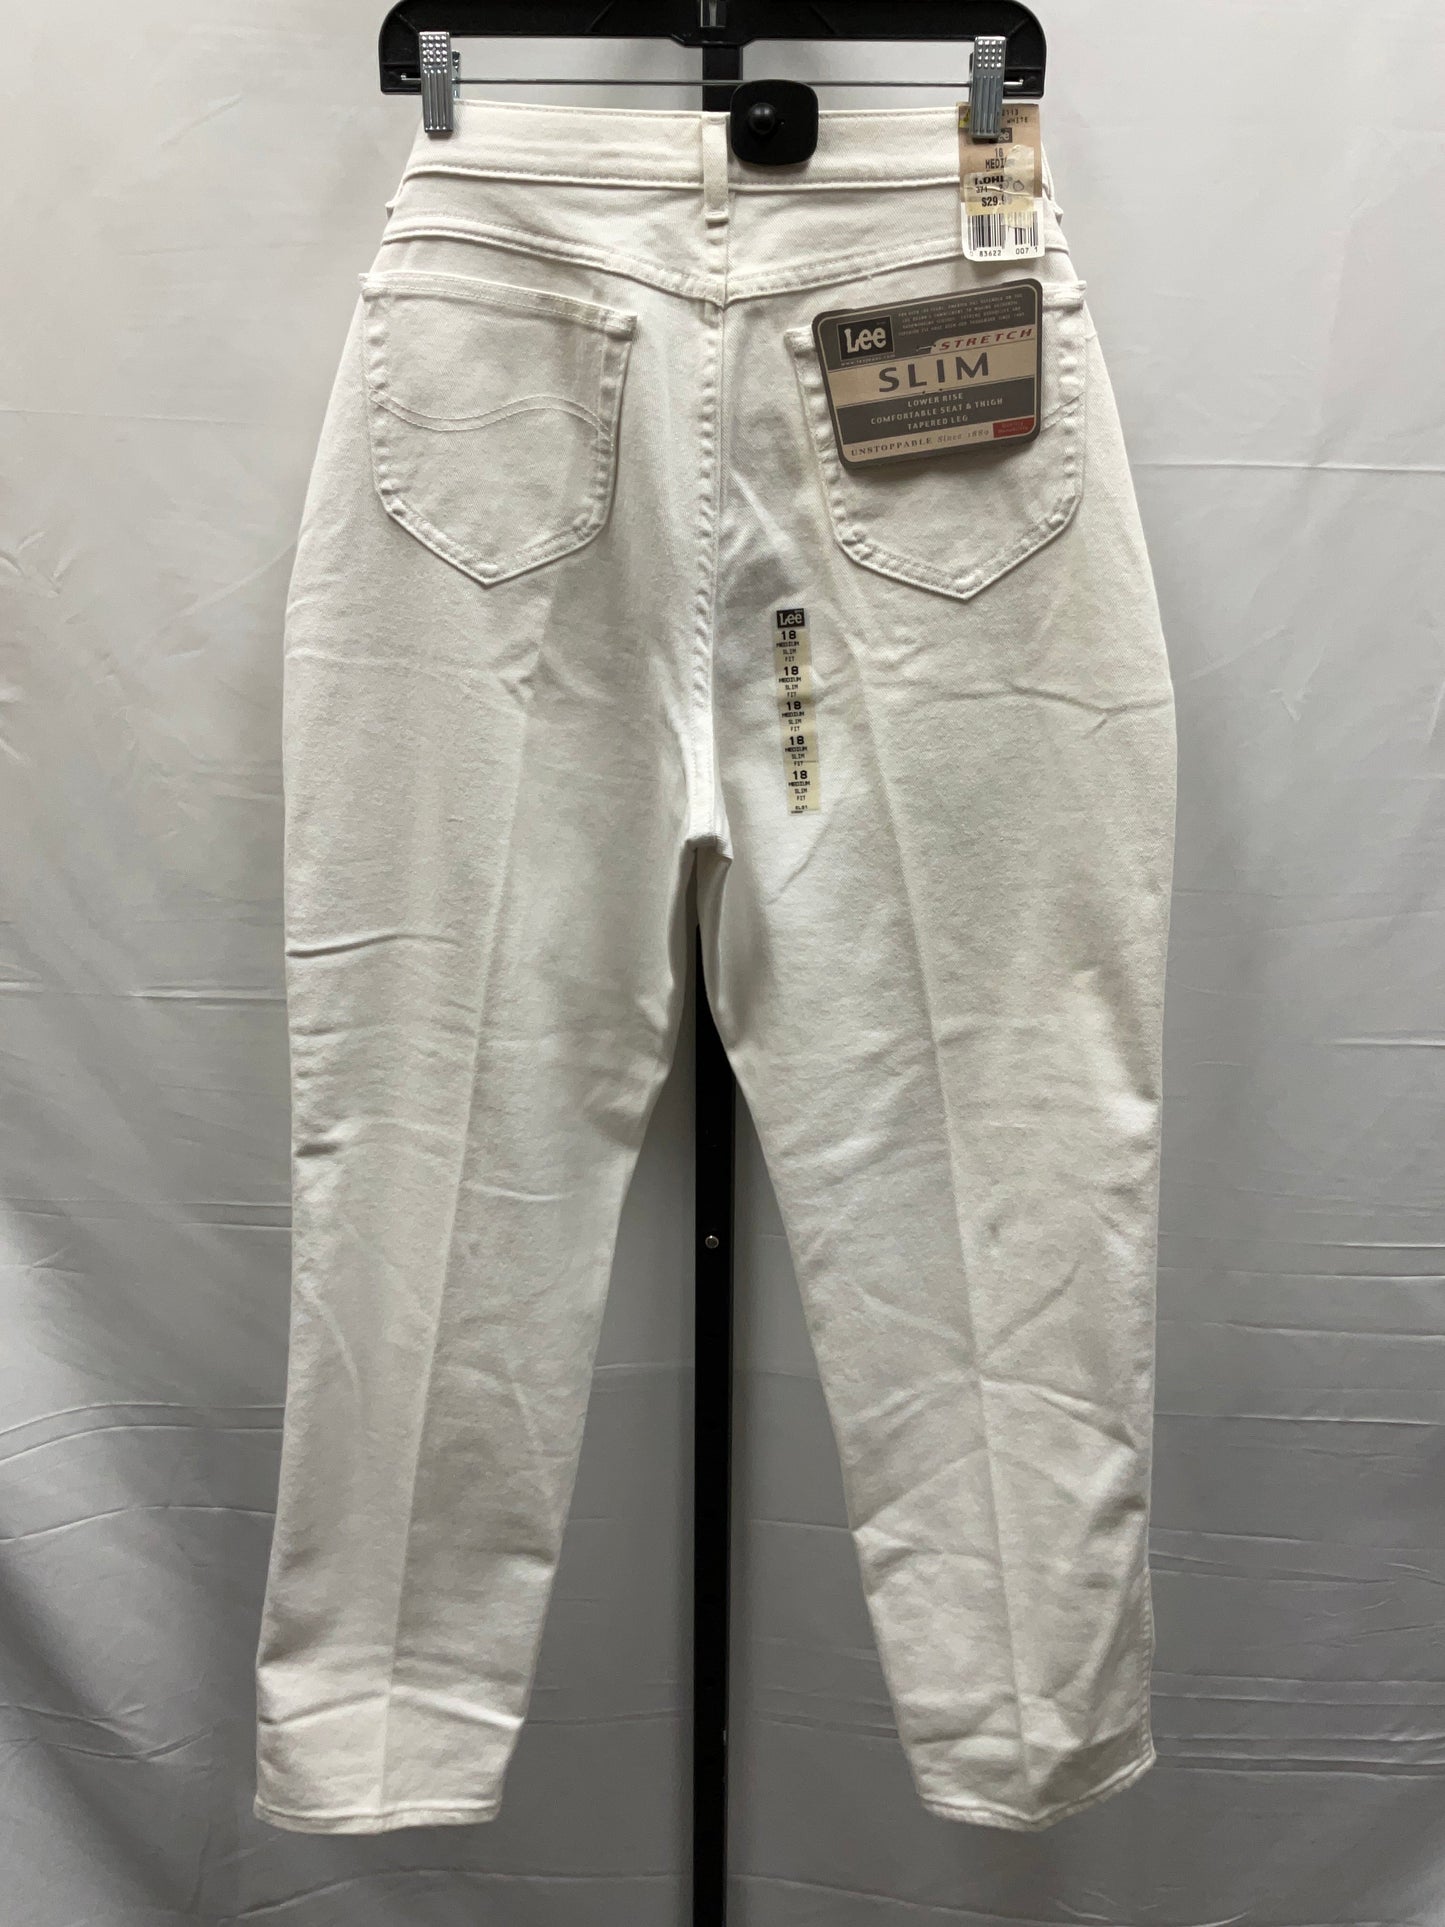 White Jeans Straight Lee, Size 18